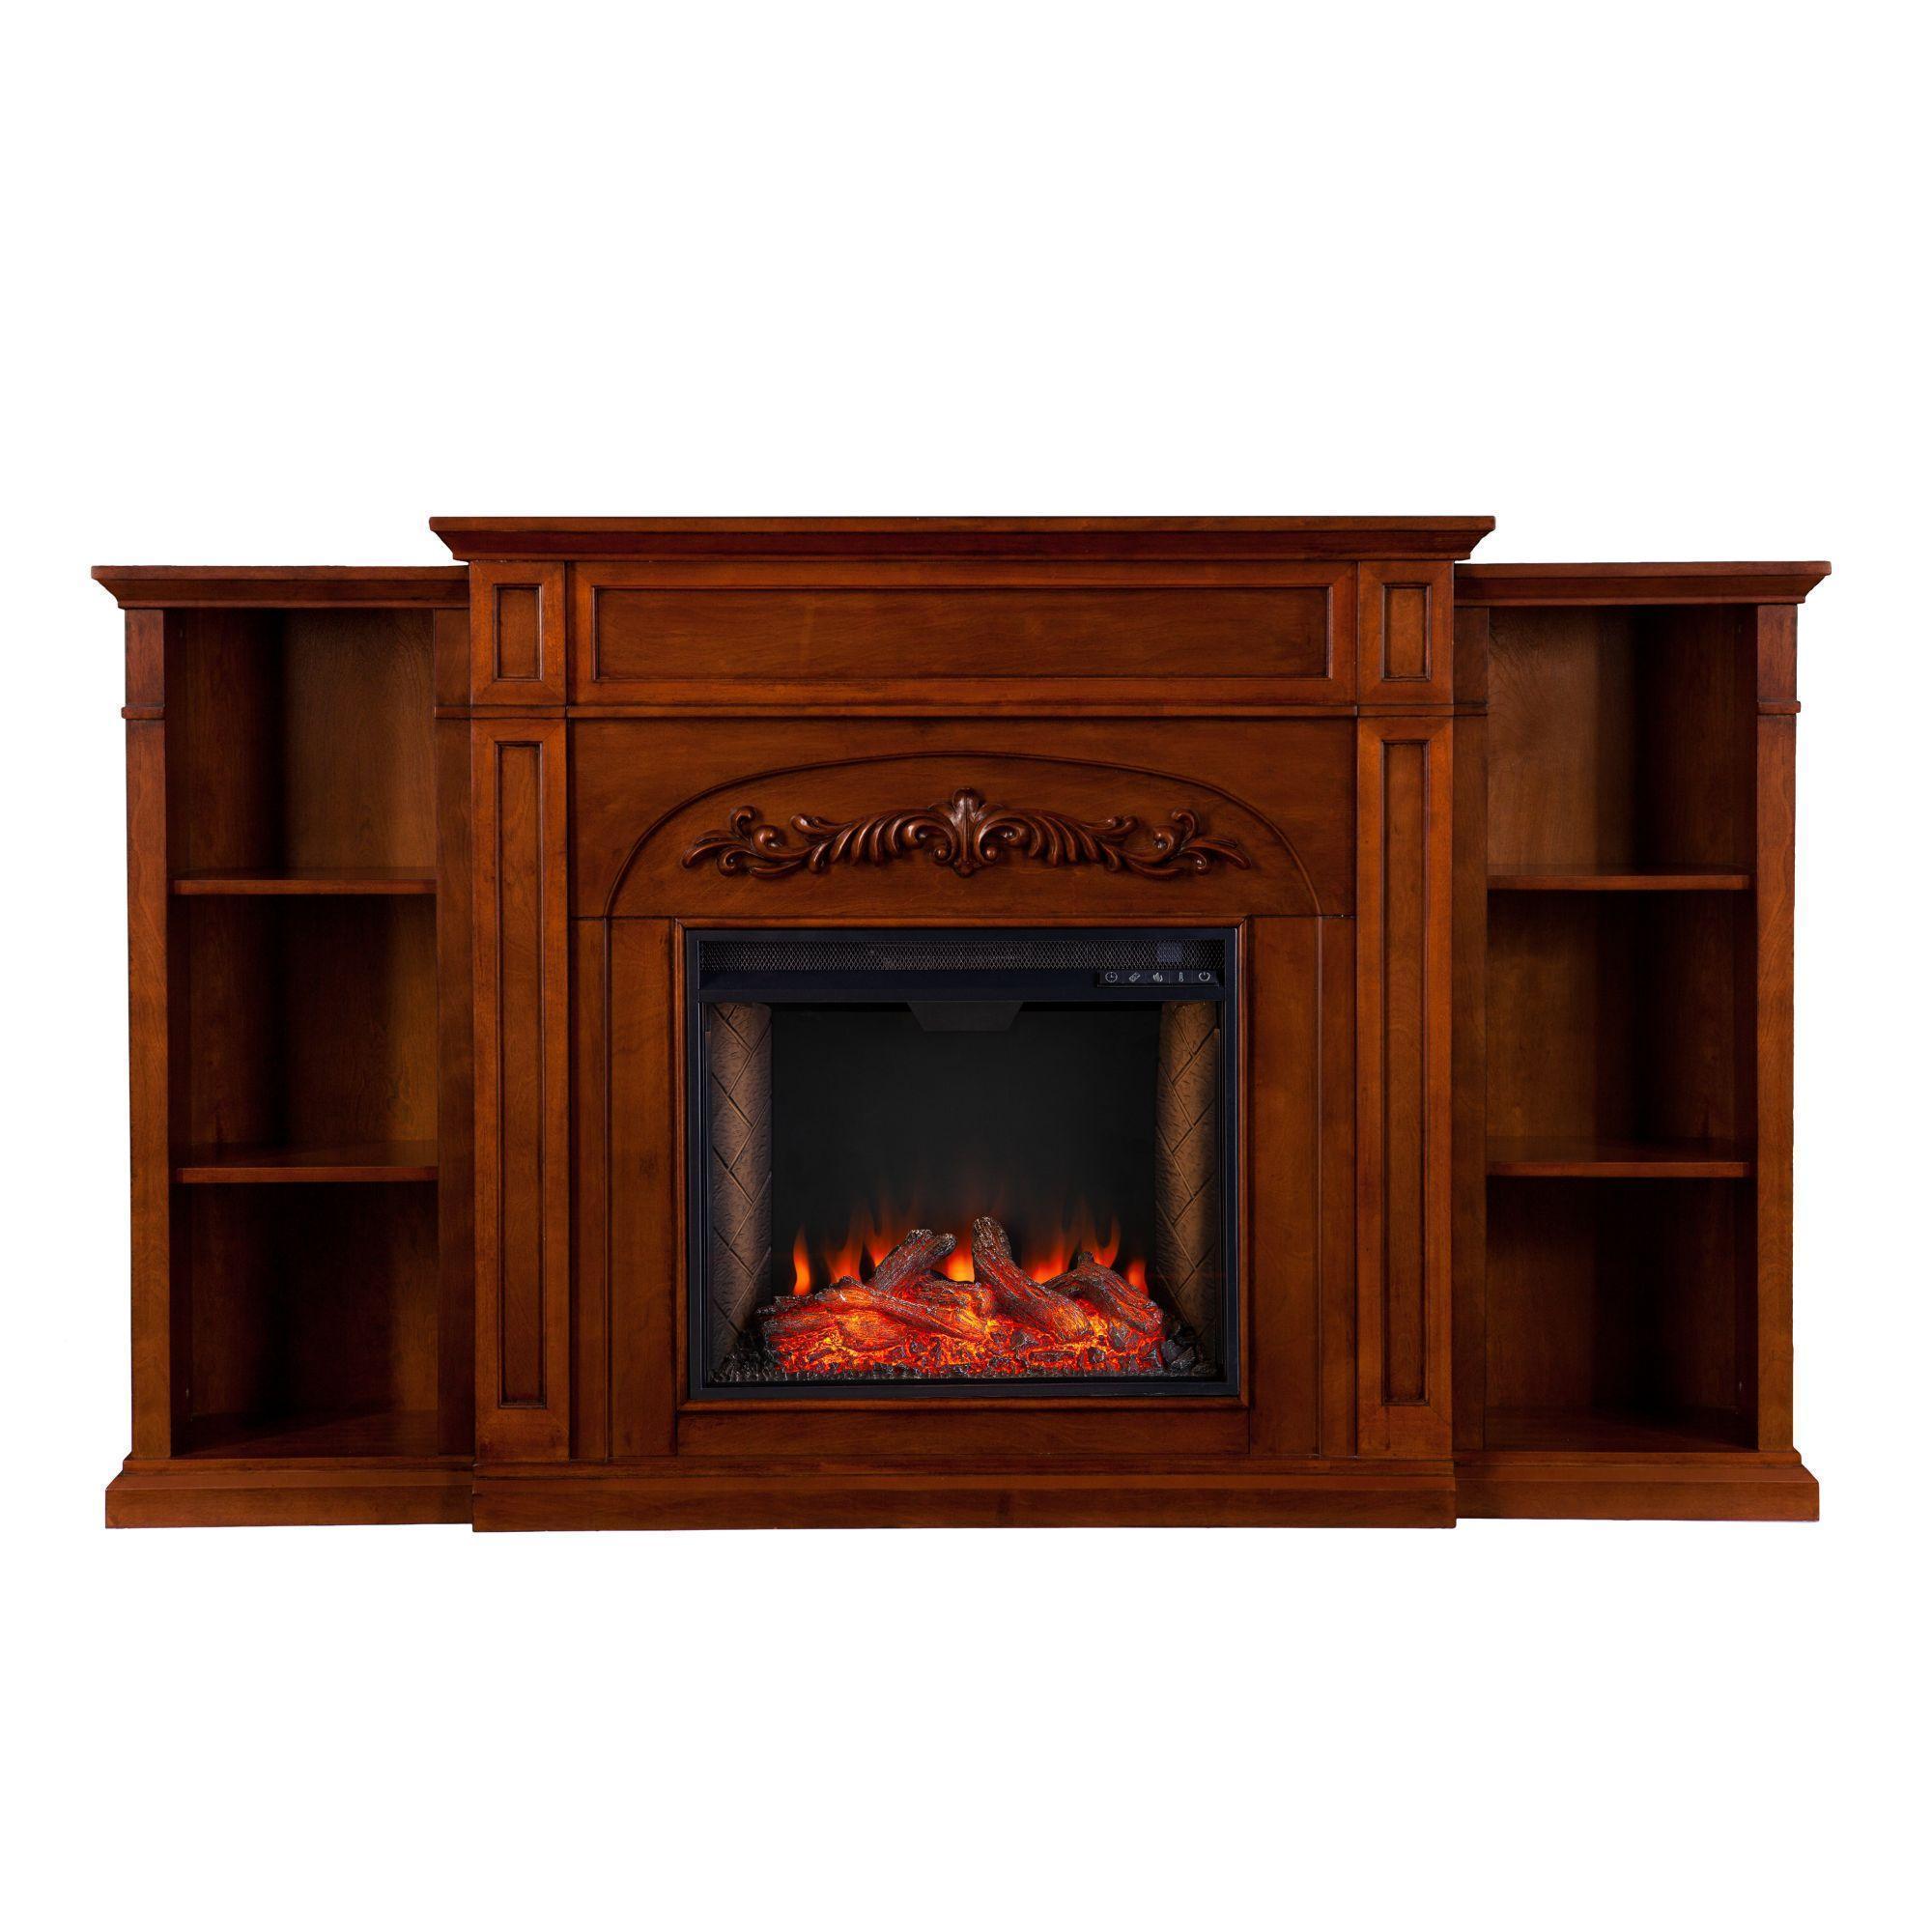 72.5" Brown Contemporary Rectangular Fireplace with Bookcase